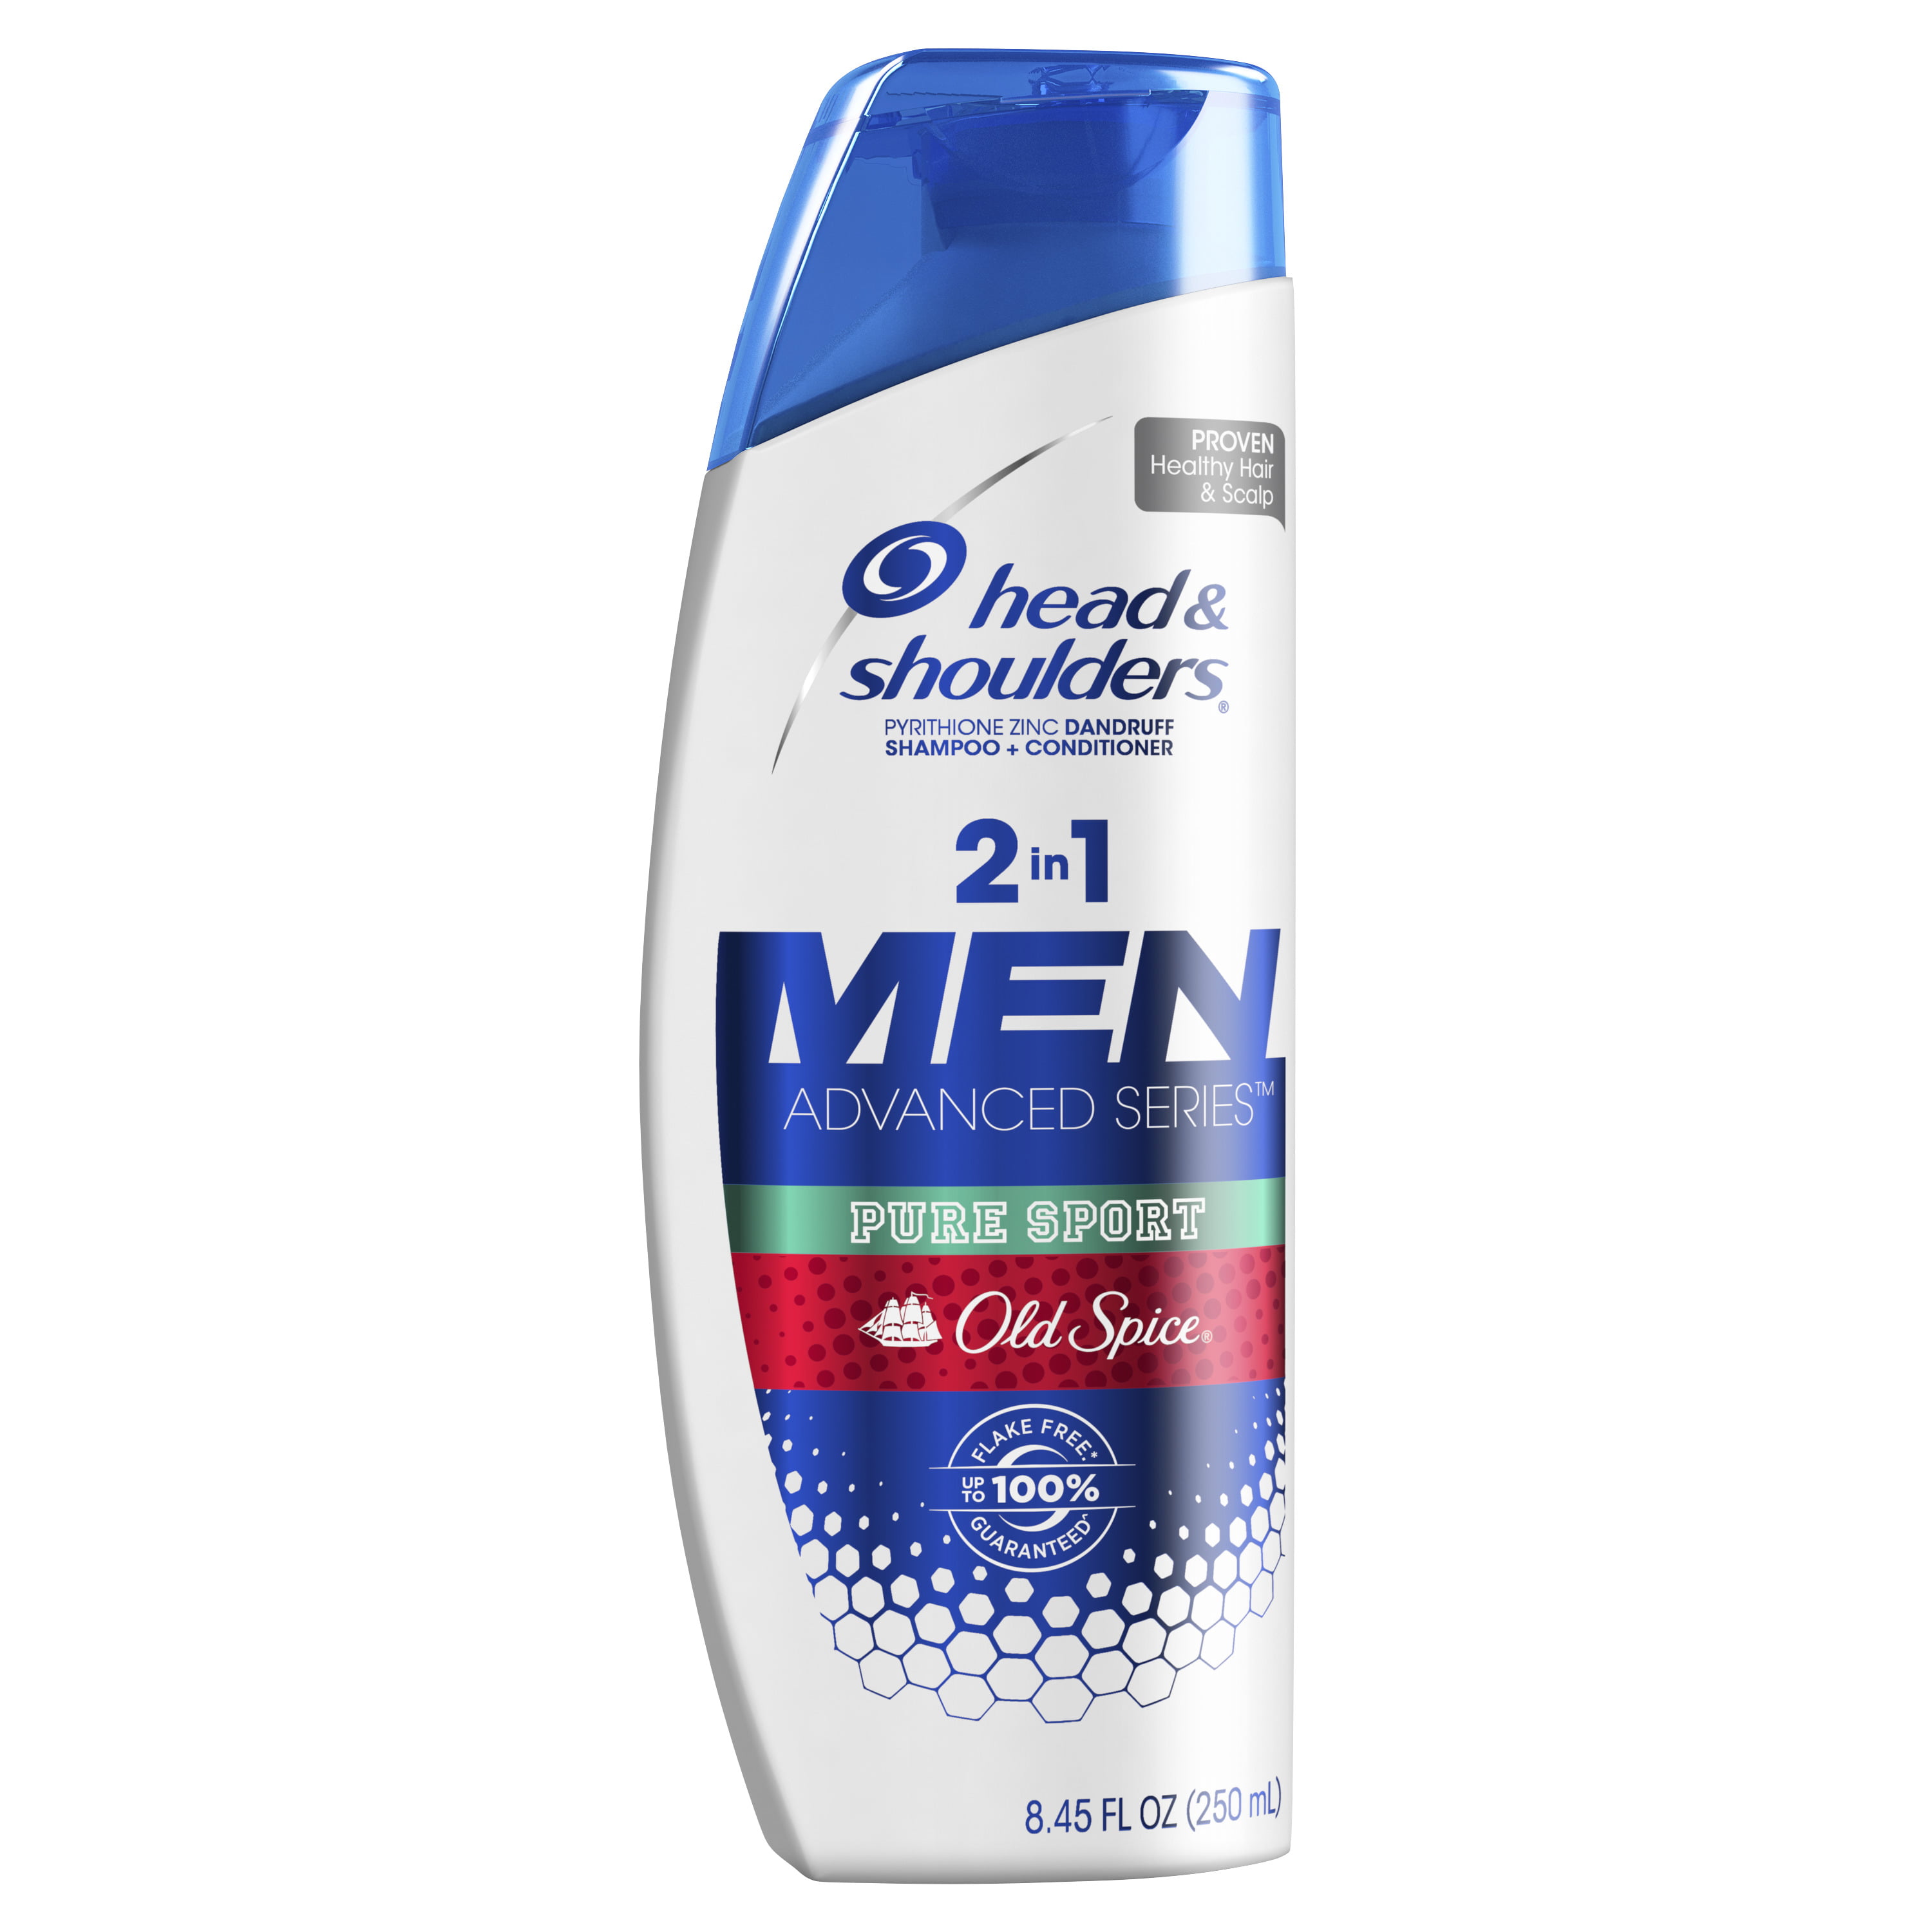 Head and Shoulders Old Spice Pure Sport Dandruff 2 in 1